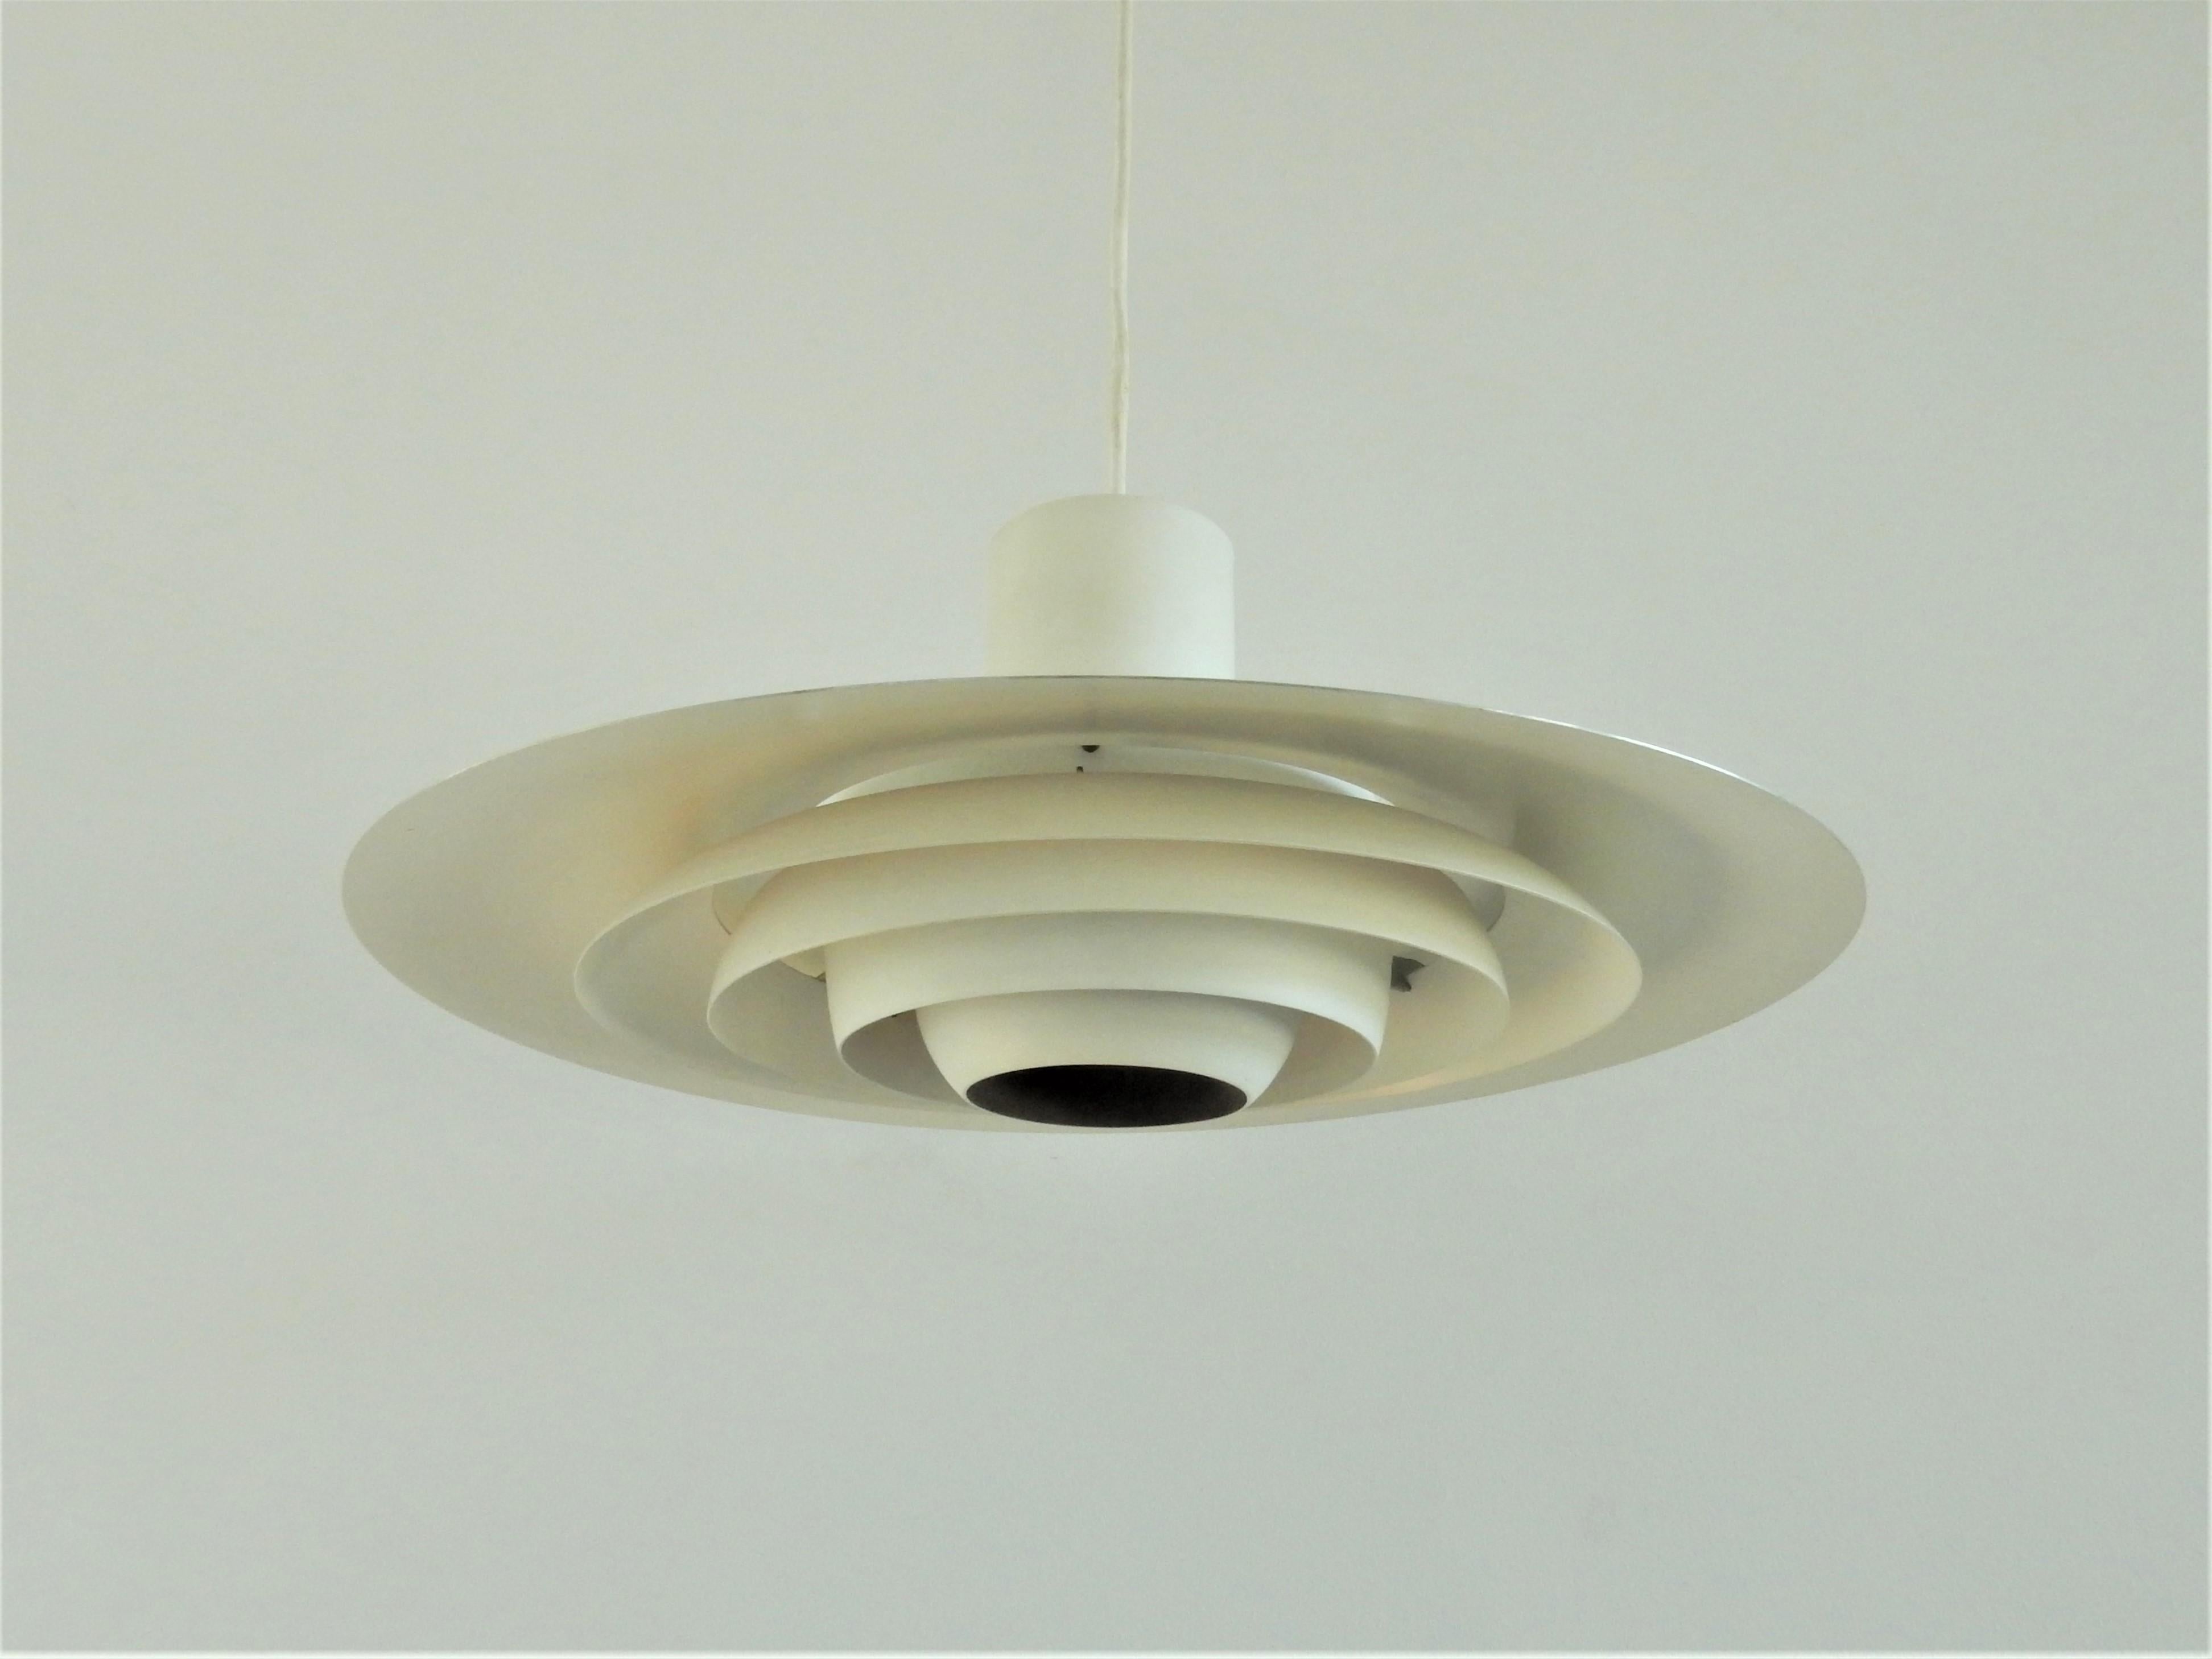 This gorgeous P376 or Kastholm pendant was designed by Jørgen Kastholm & Preben Fabricius for Nordisk Solar Compagni in 1964. This pendant came in three sizes and this one is the smallest size with a diameter of 47.5 cm. The pendant is made of white